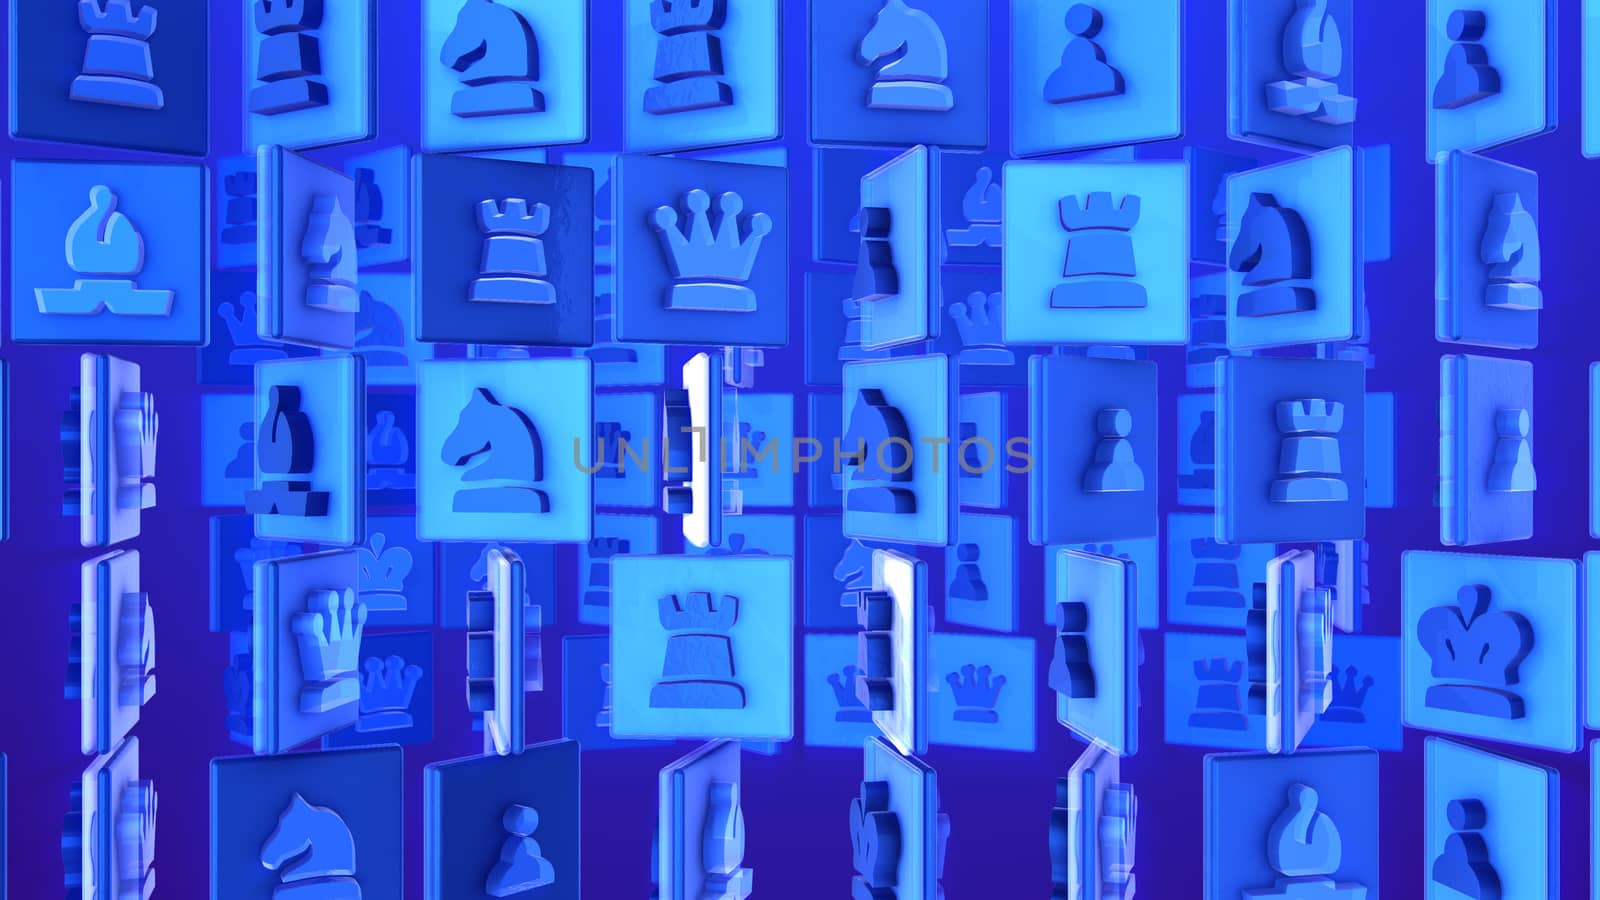 Amazing 3d illustration of chess multiscreen rotation symbols of pawns, horses, queens, and castles in the blue background. They look optimistic and fine